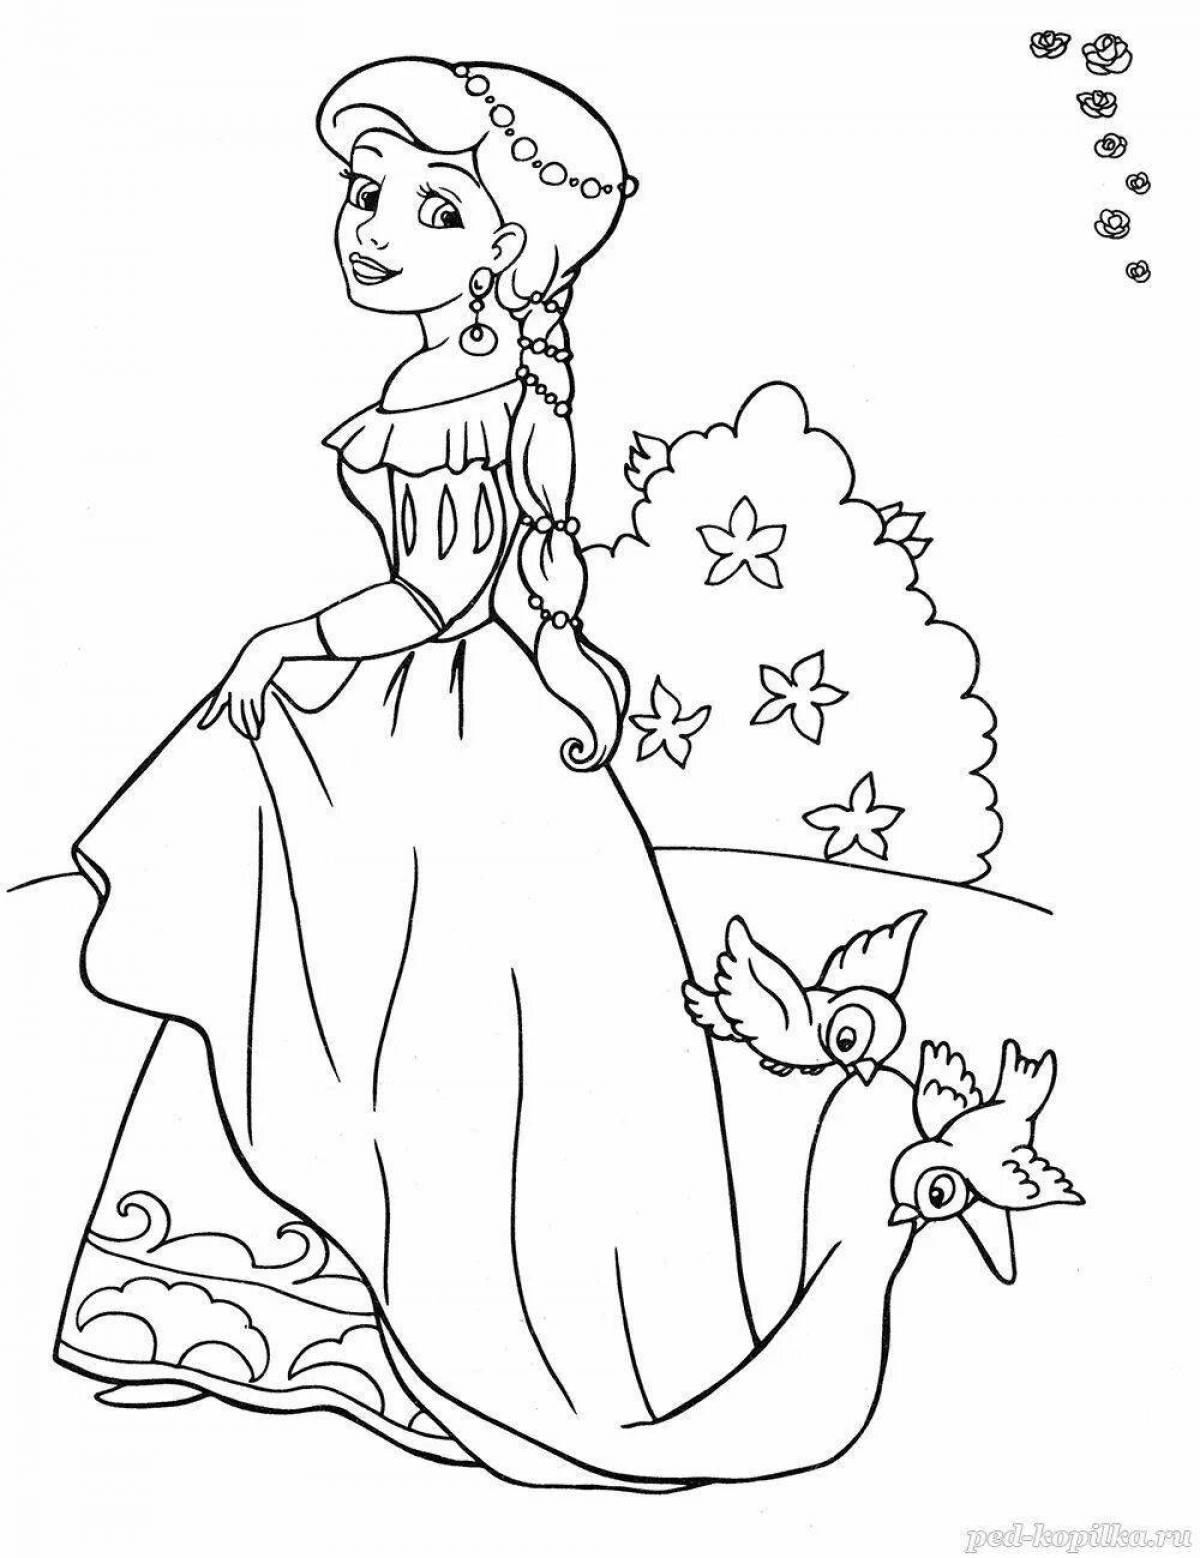 Amazing coloring book for princess girls 5-6 years old